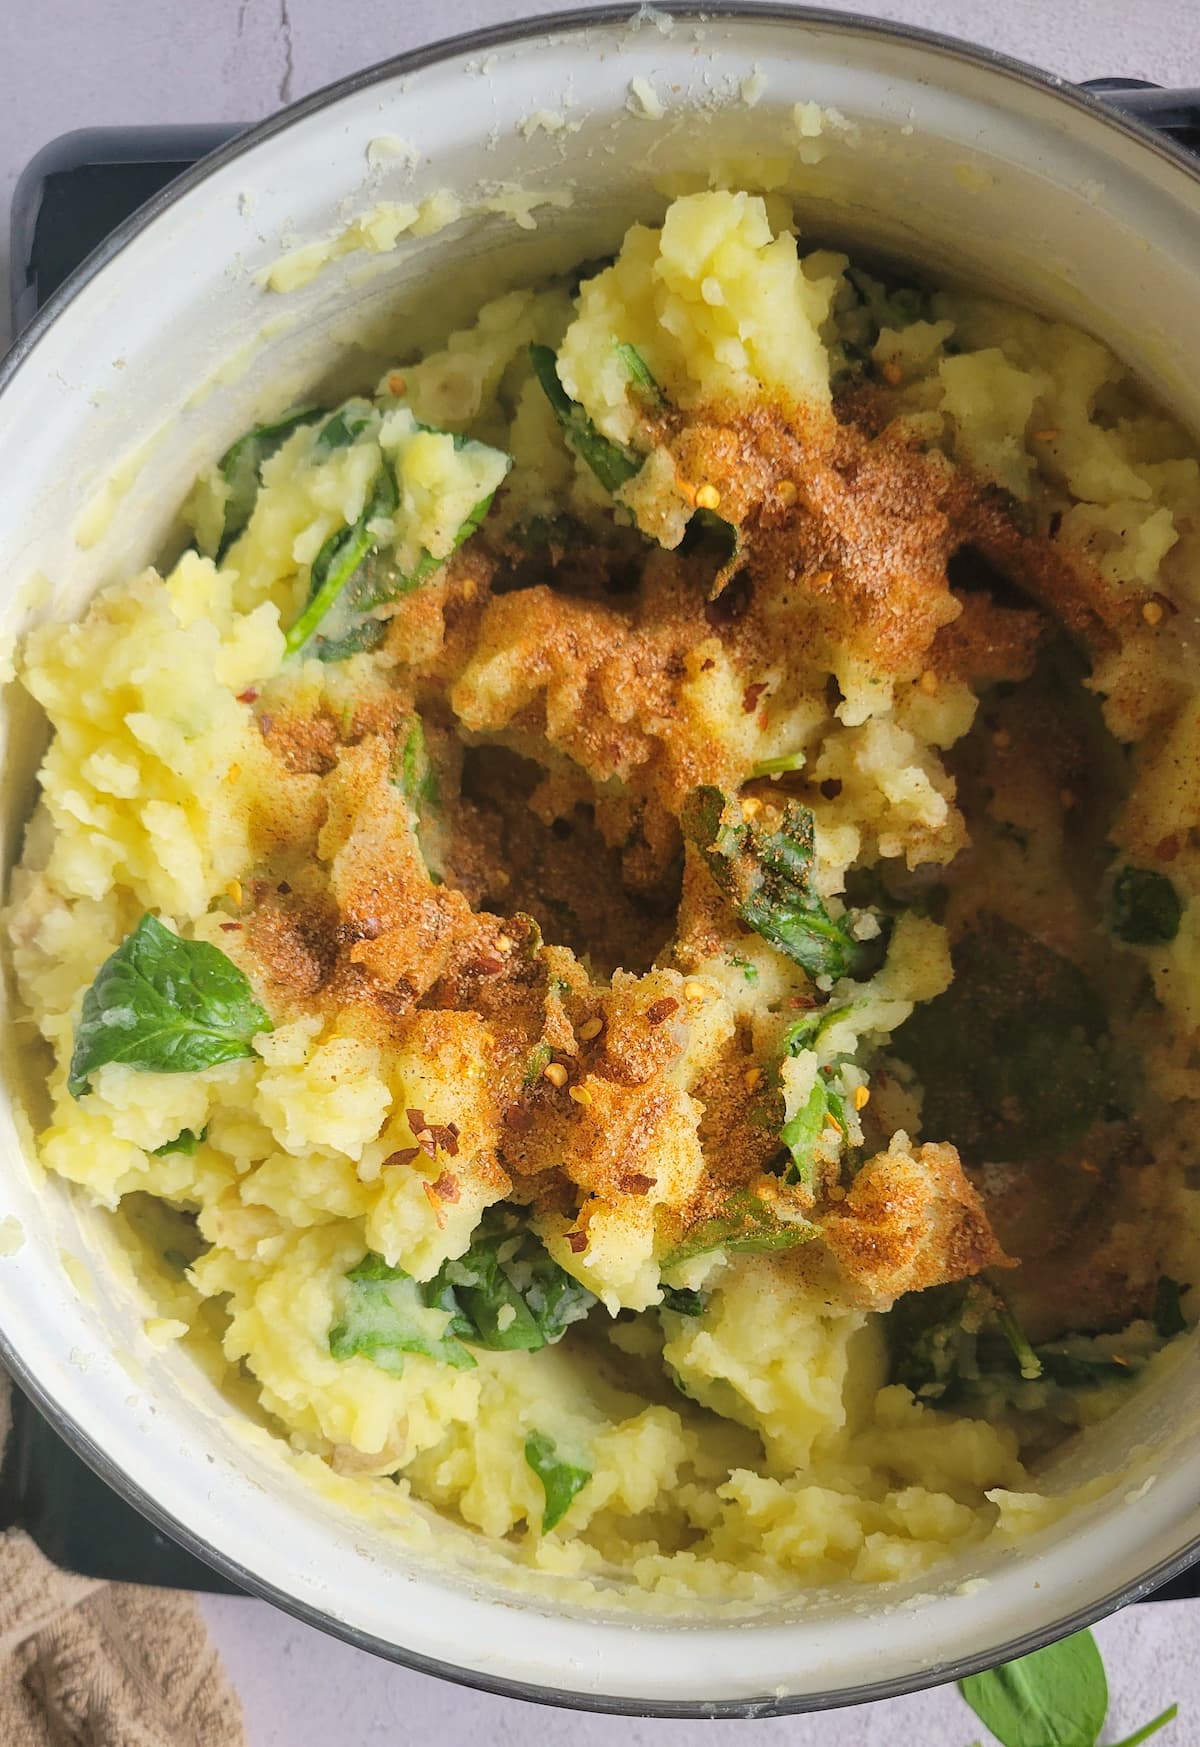 mashed potatoes and spinach topped with paprika in a pot